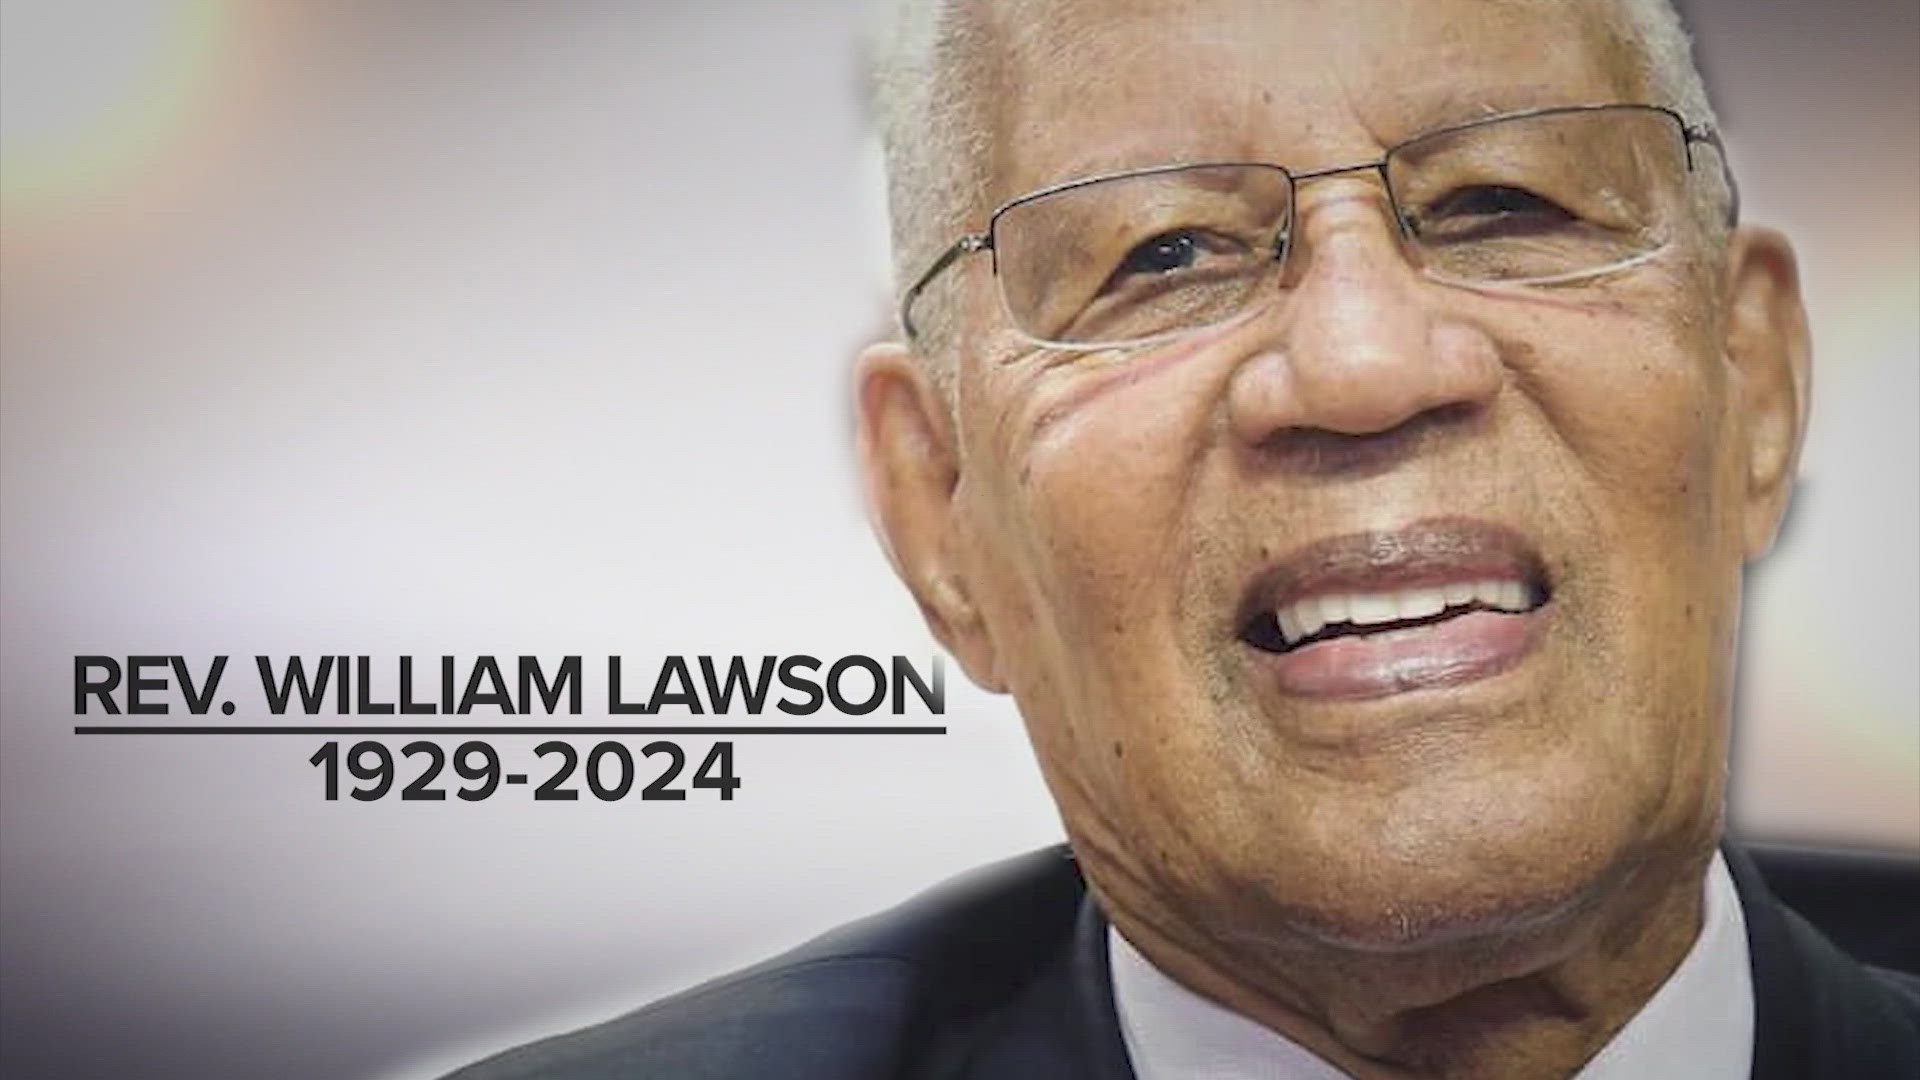 We're saddened to share the passing of the Reverend William Bill Lawson at age 95.